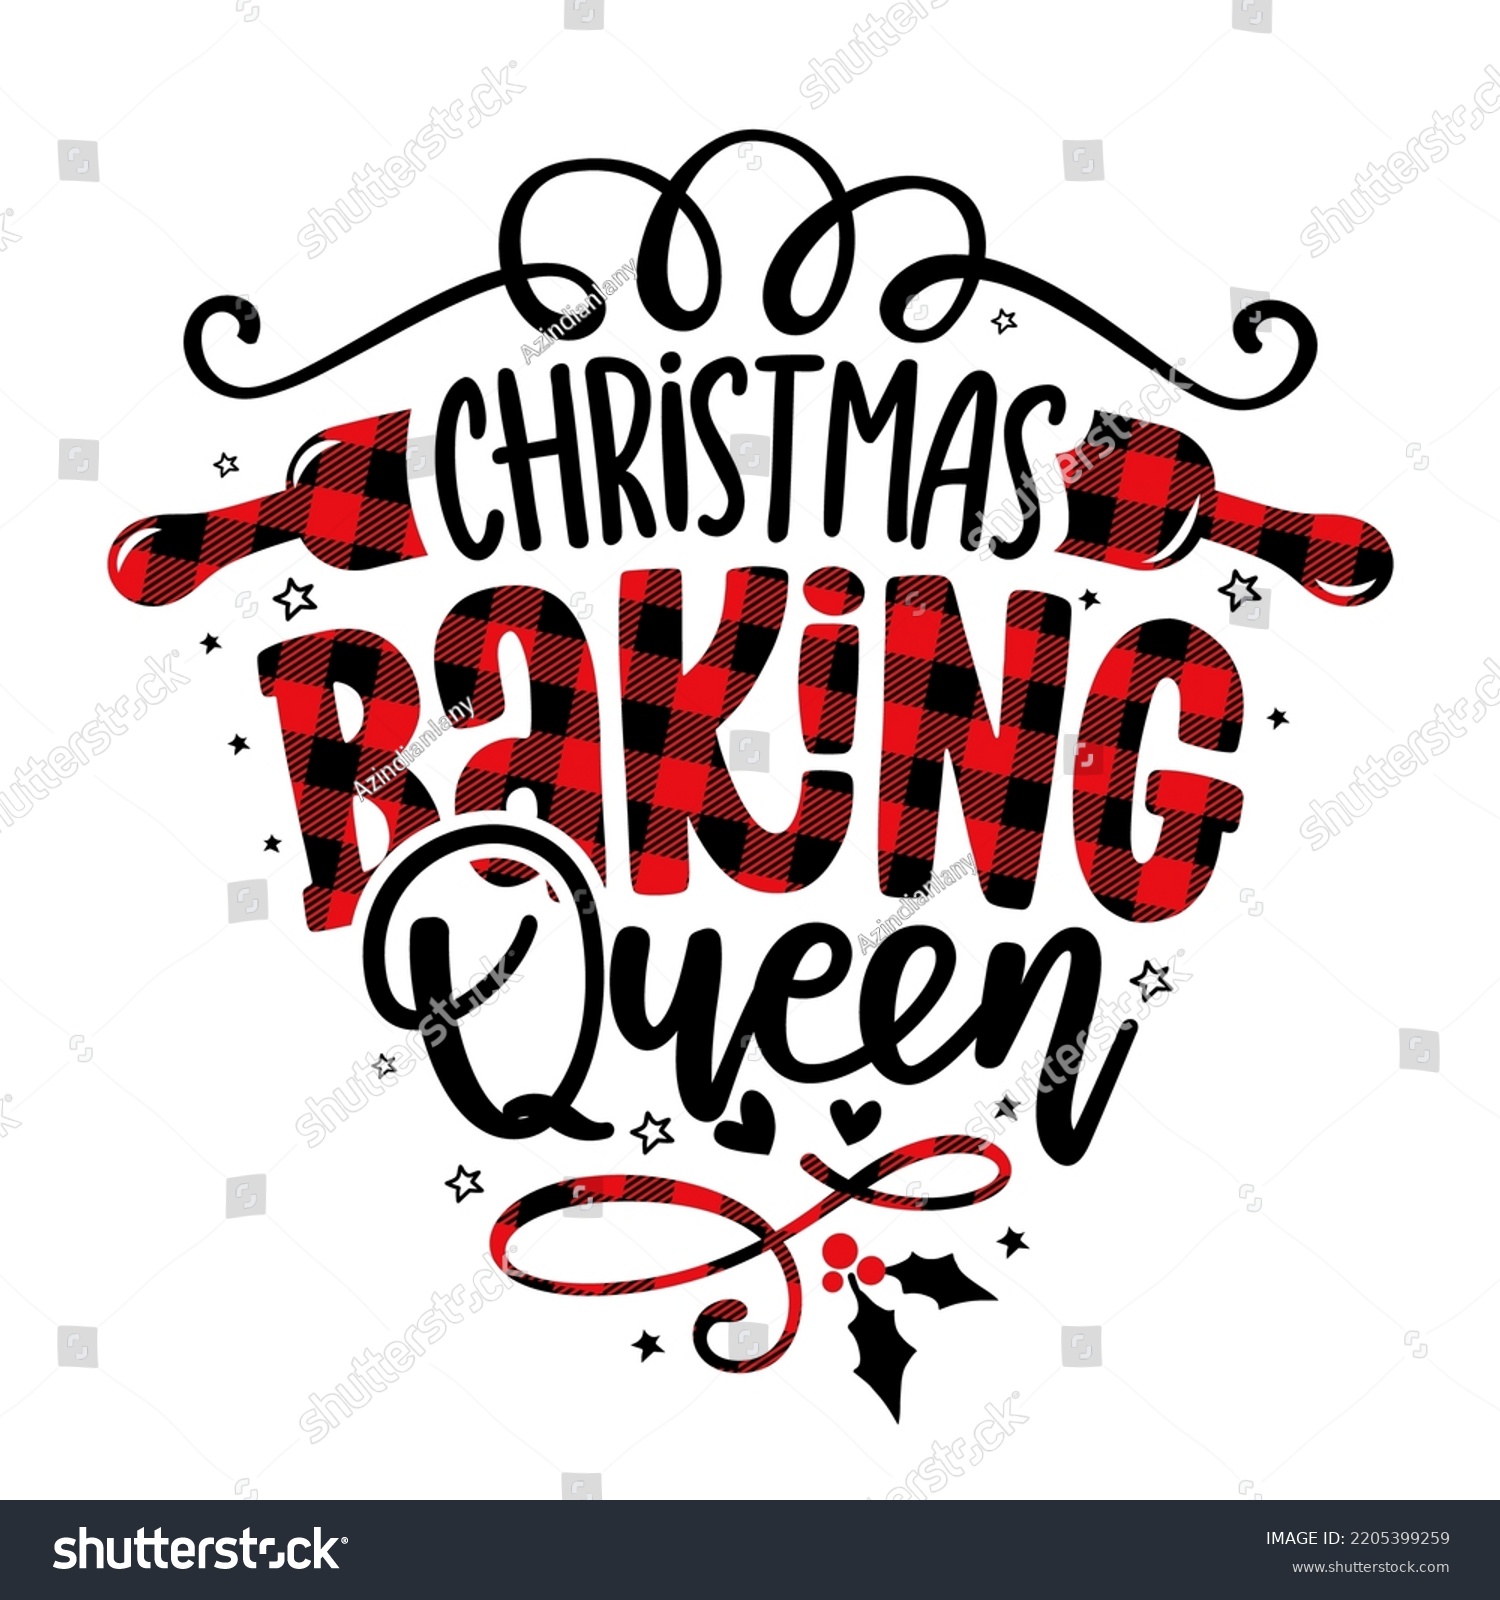 SVG of Christmas Baking Queen - lovely Calligraphy phrase for Kitchen towels. Hand drawn lettering for Lovely greetings cards, invitations. Good for t-shirt, mug, scrap booking, gift, Merry Xmas! svg